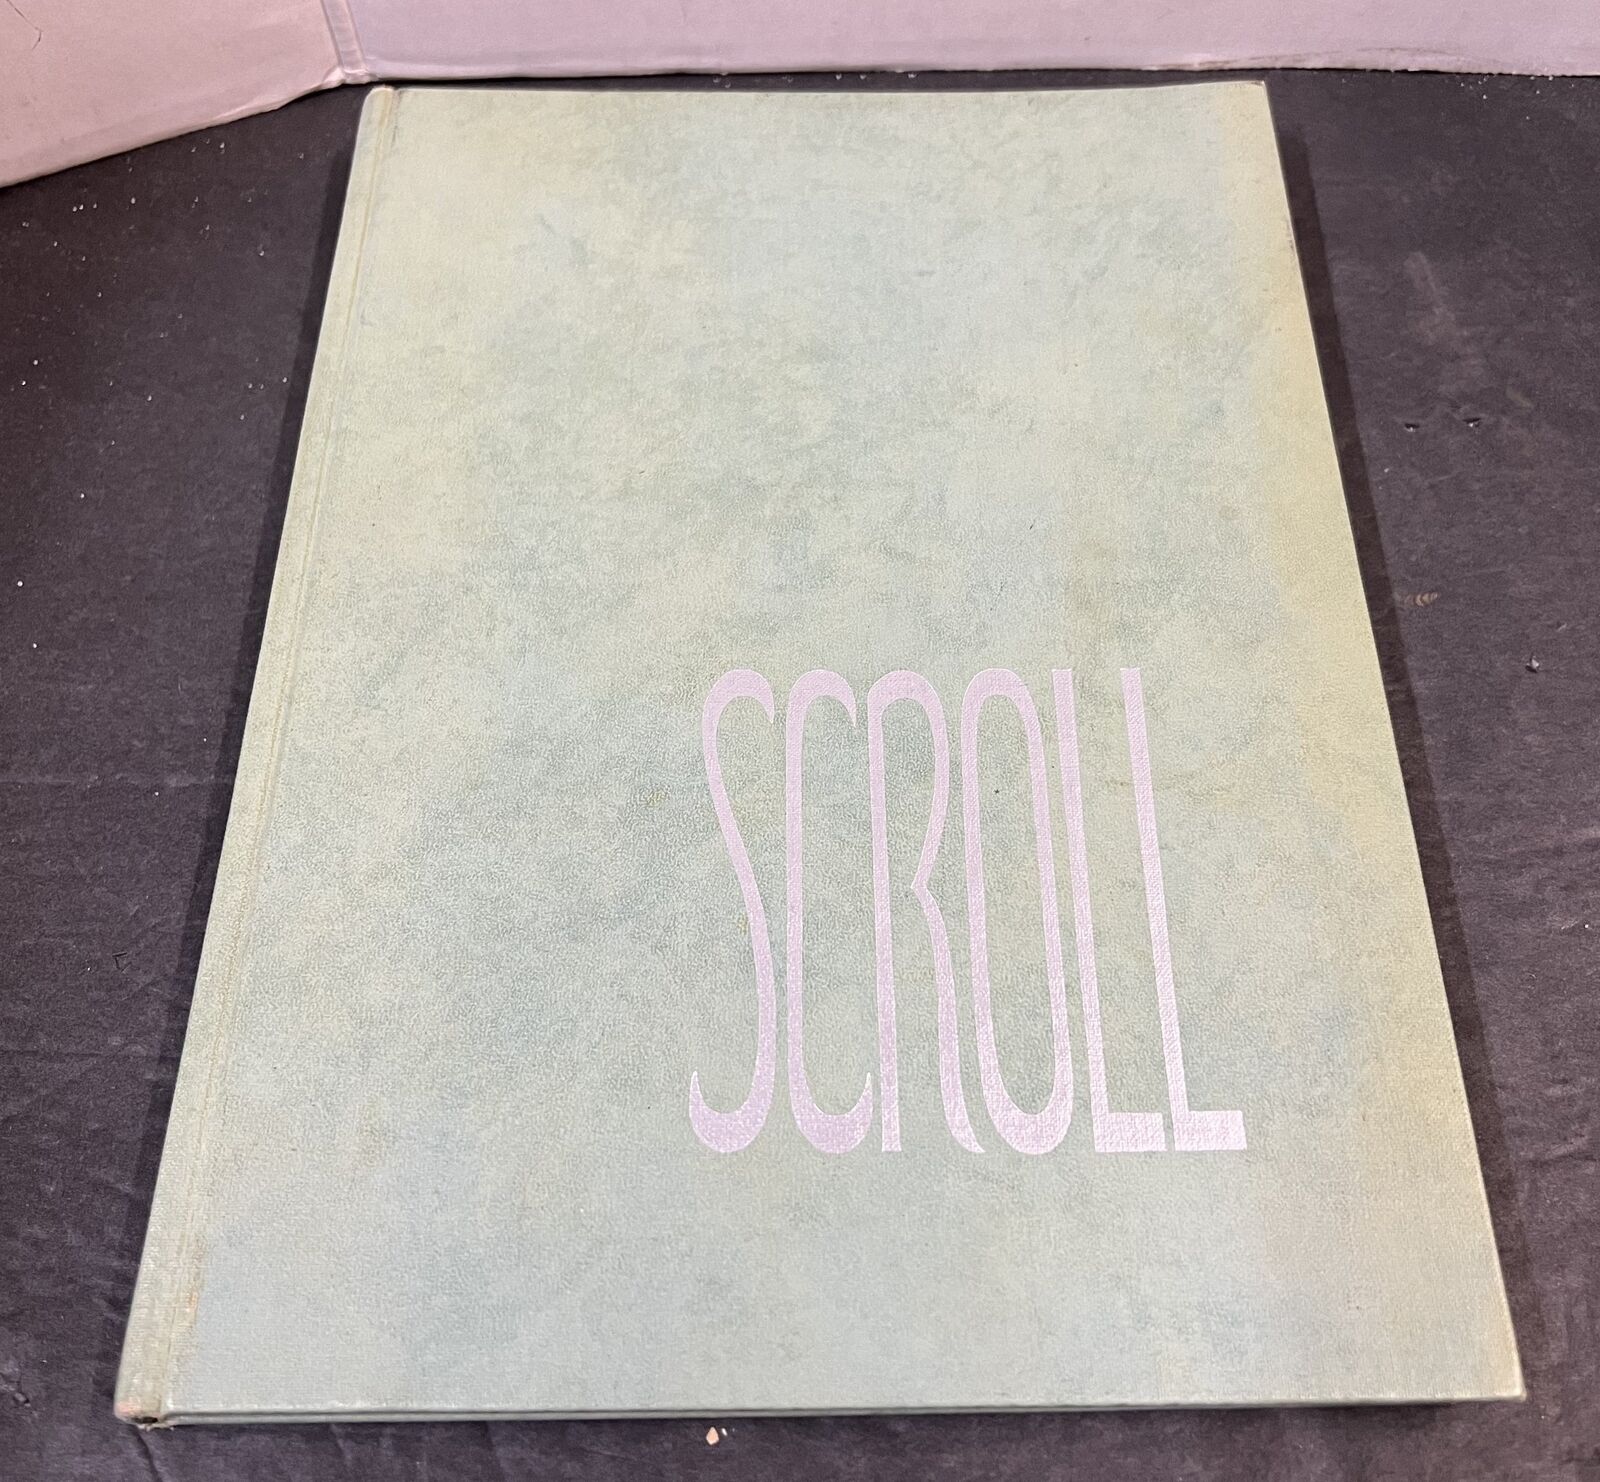 1952 Scroll Herbert Hoover High School Yearbook - Inscribed/Signed by Students